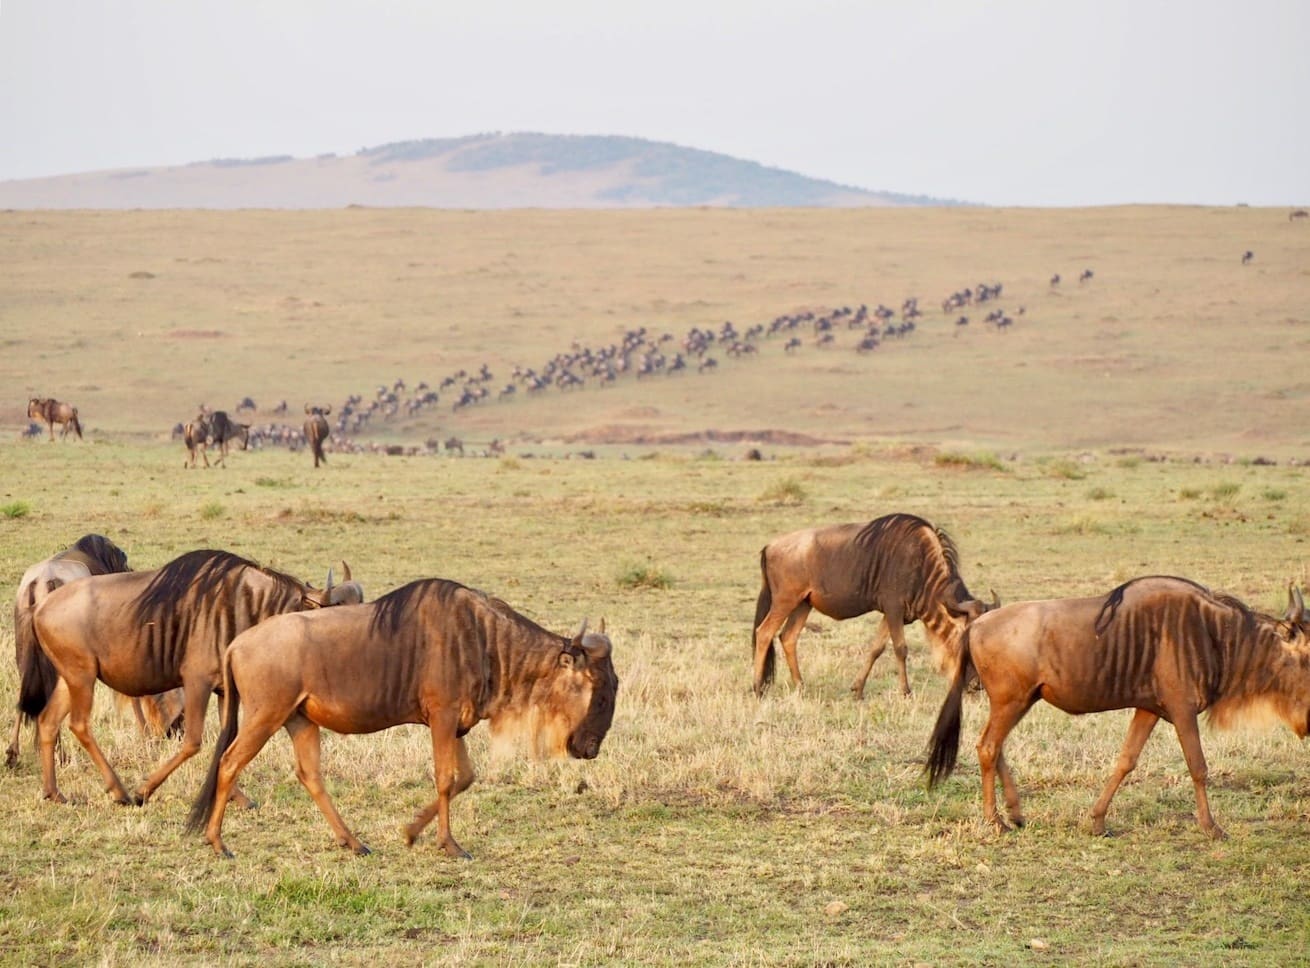 The Great Wildebeest Migration taking place in the Masai Mara.